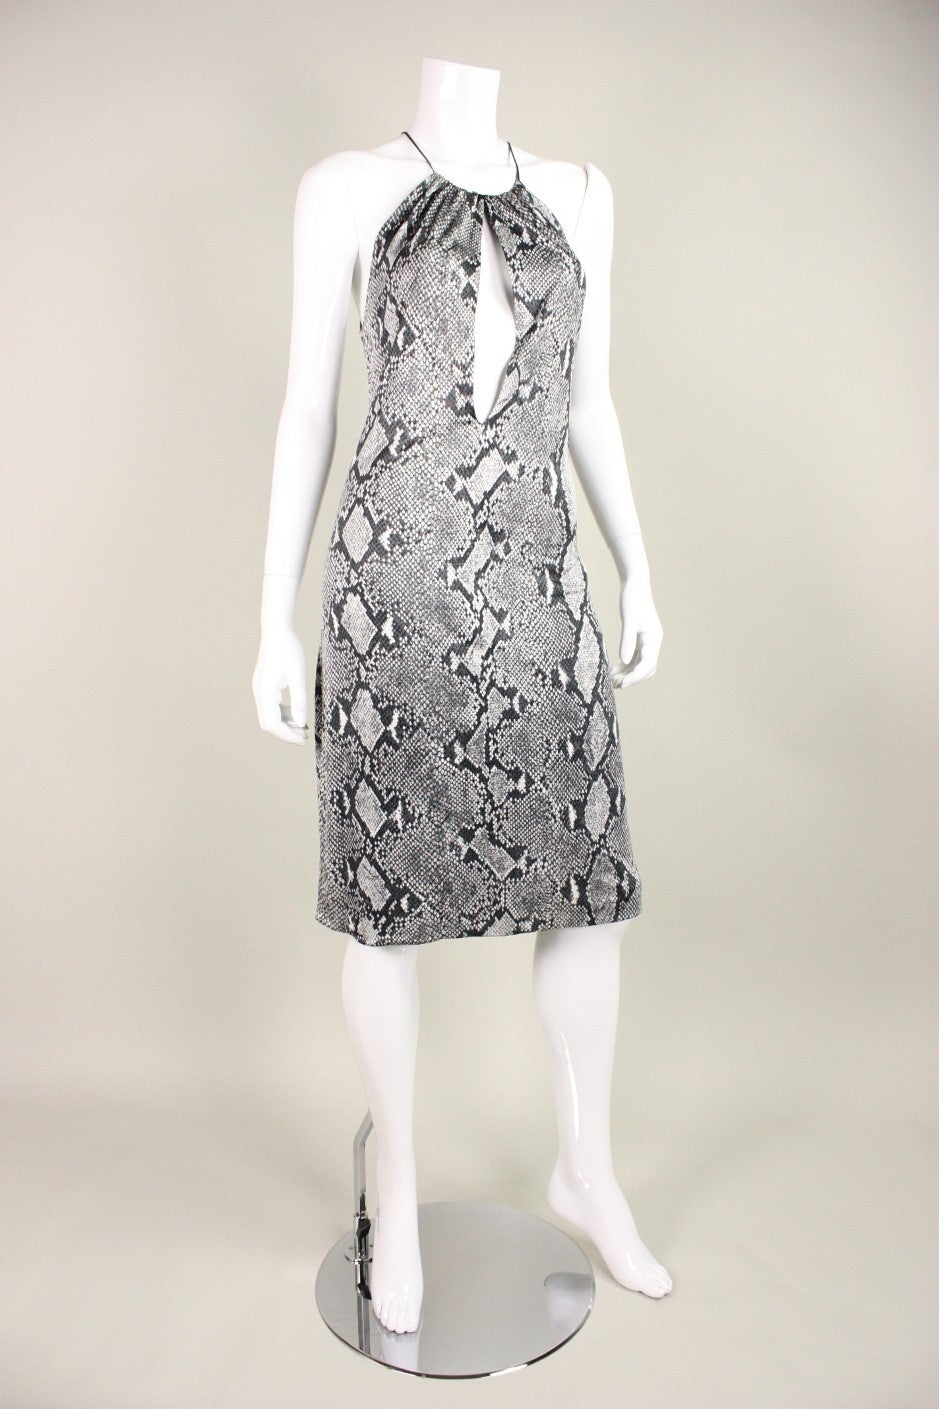 Sexy dress by Tom Ford For Gucci is made of two layers of silk jersey with a monochromatic snakeskin print.  Large keyhole in center front extends from the neckline to navel. No closures. Dress dates to Gucci's S/S 2000 collection.

Labeled a size